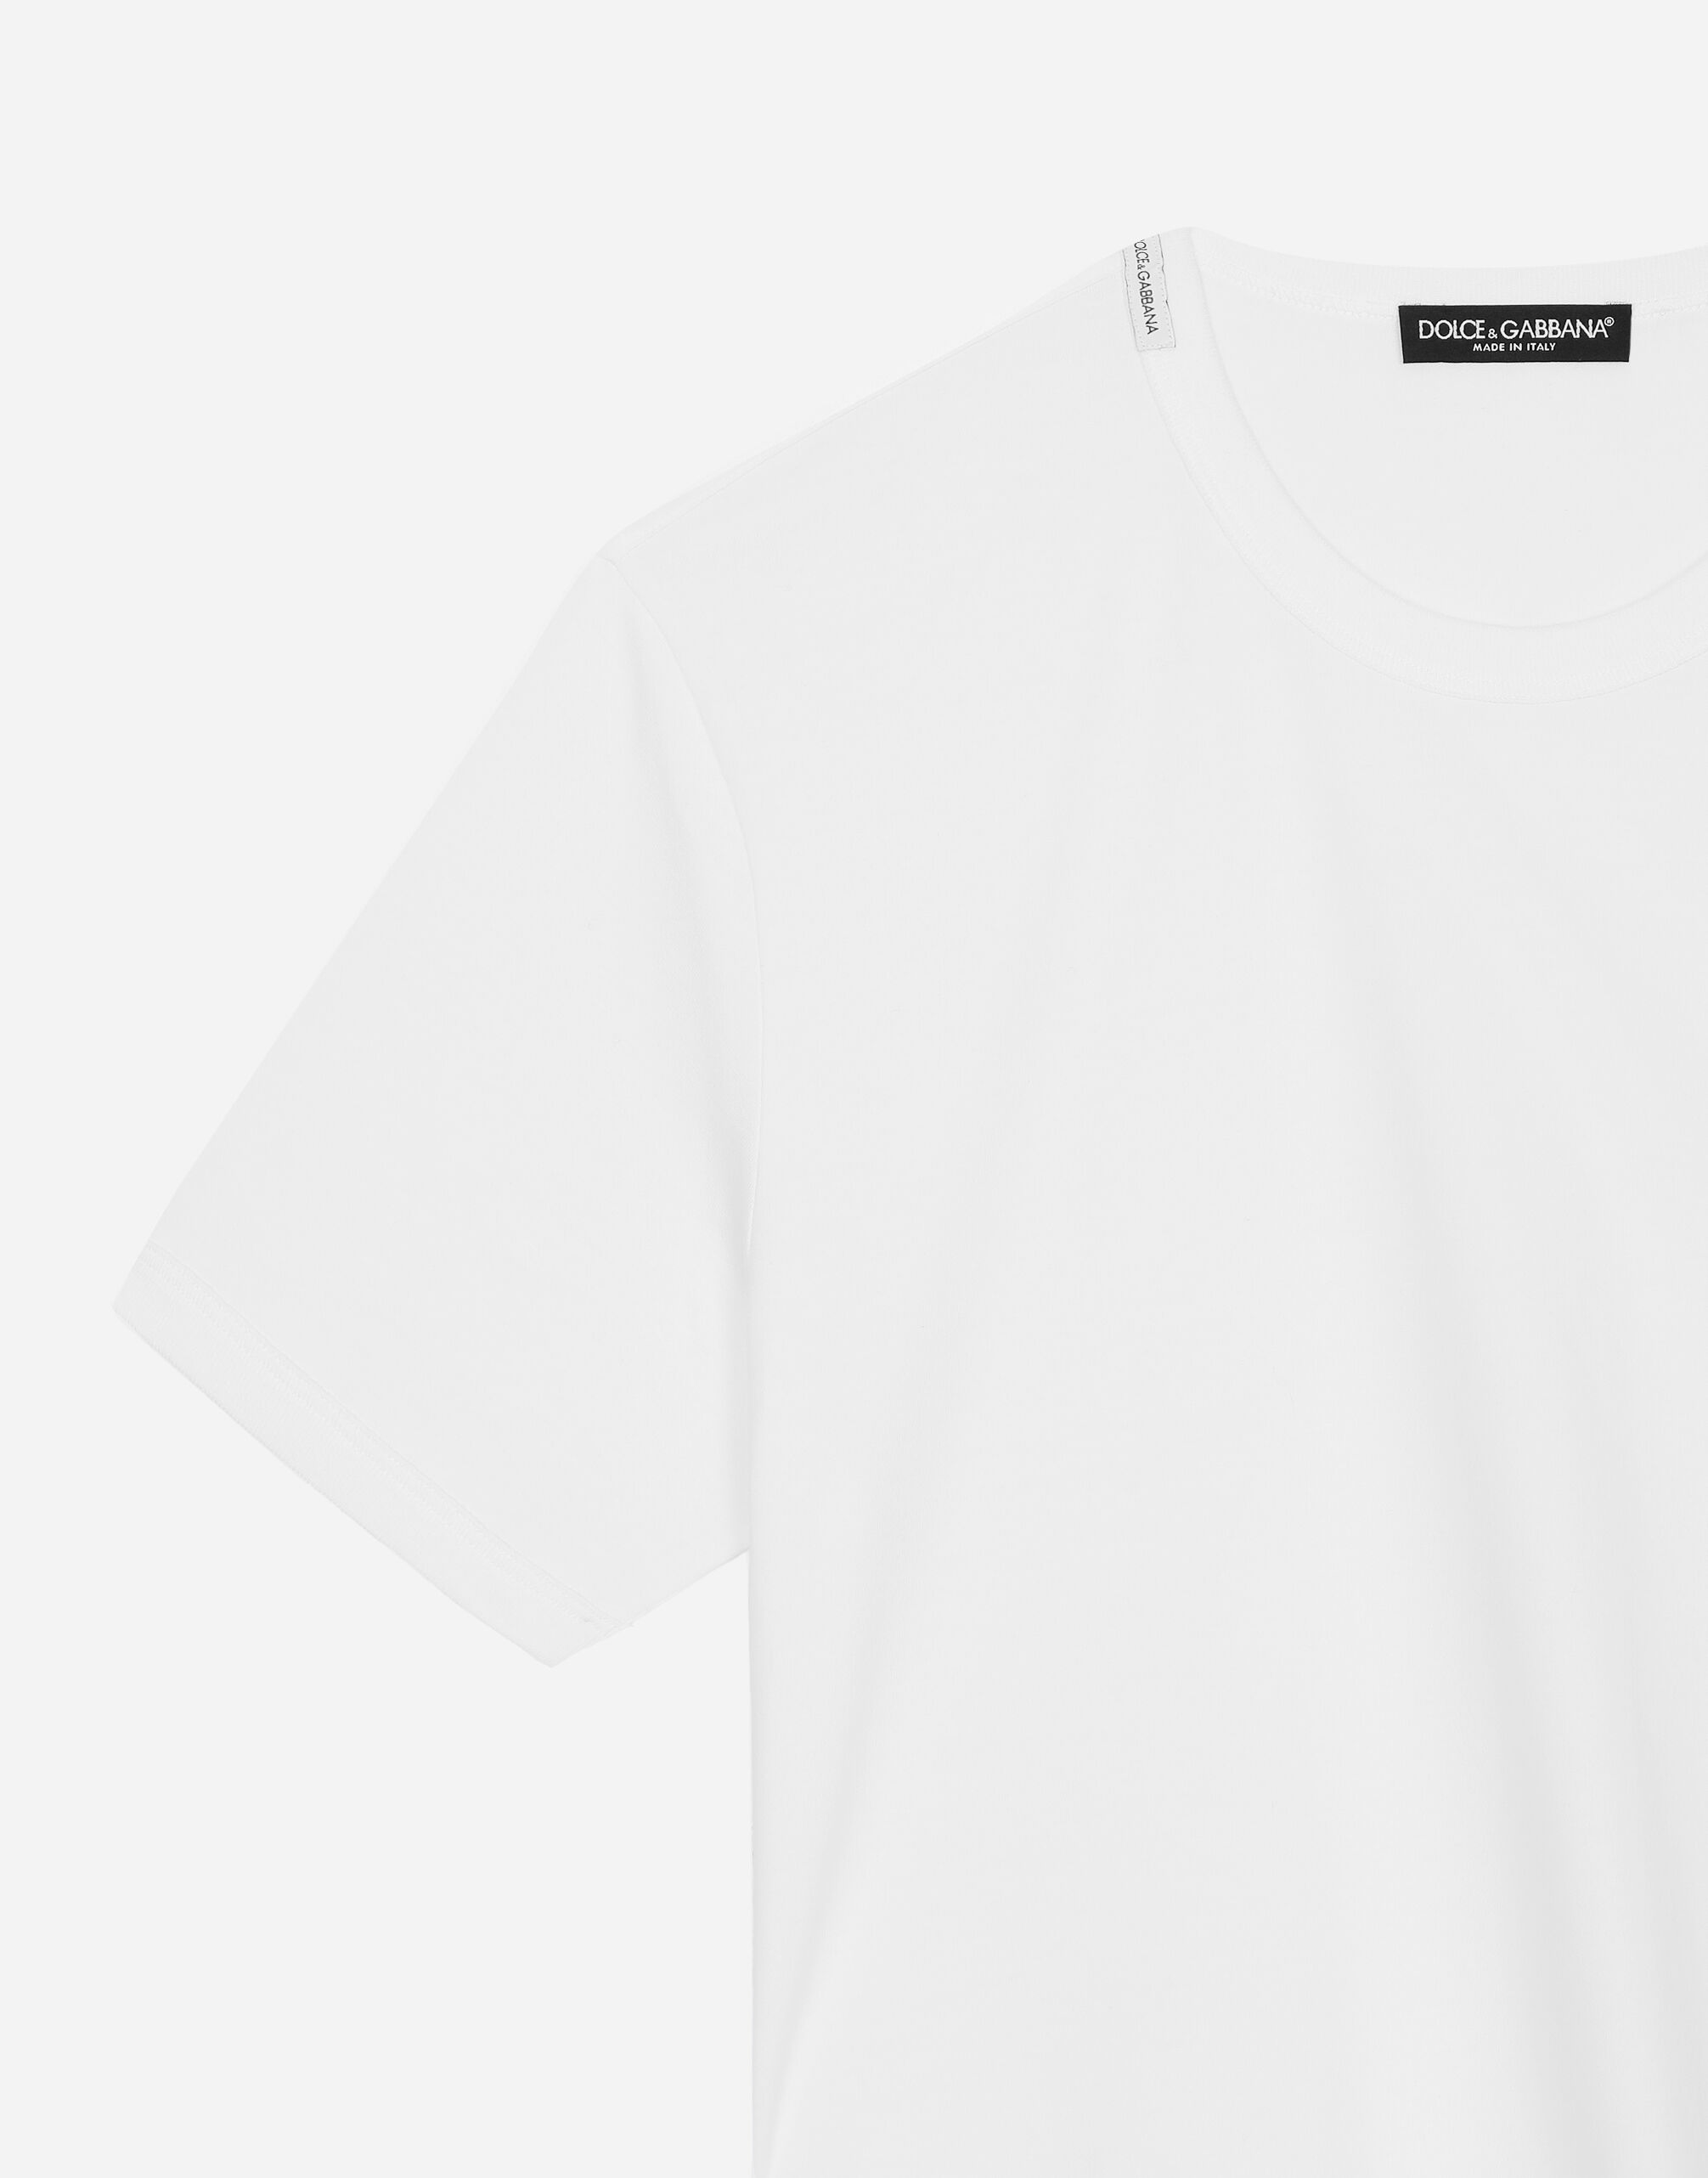 T-shirt in cotton